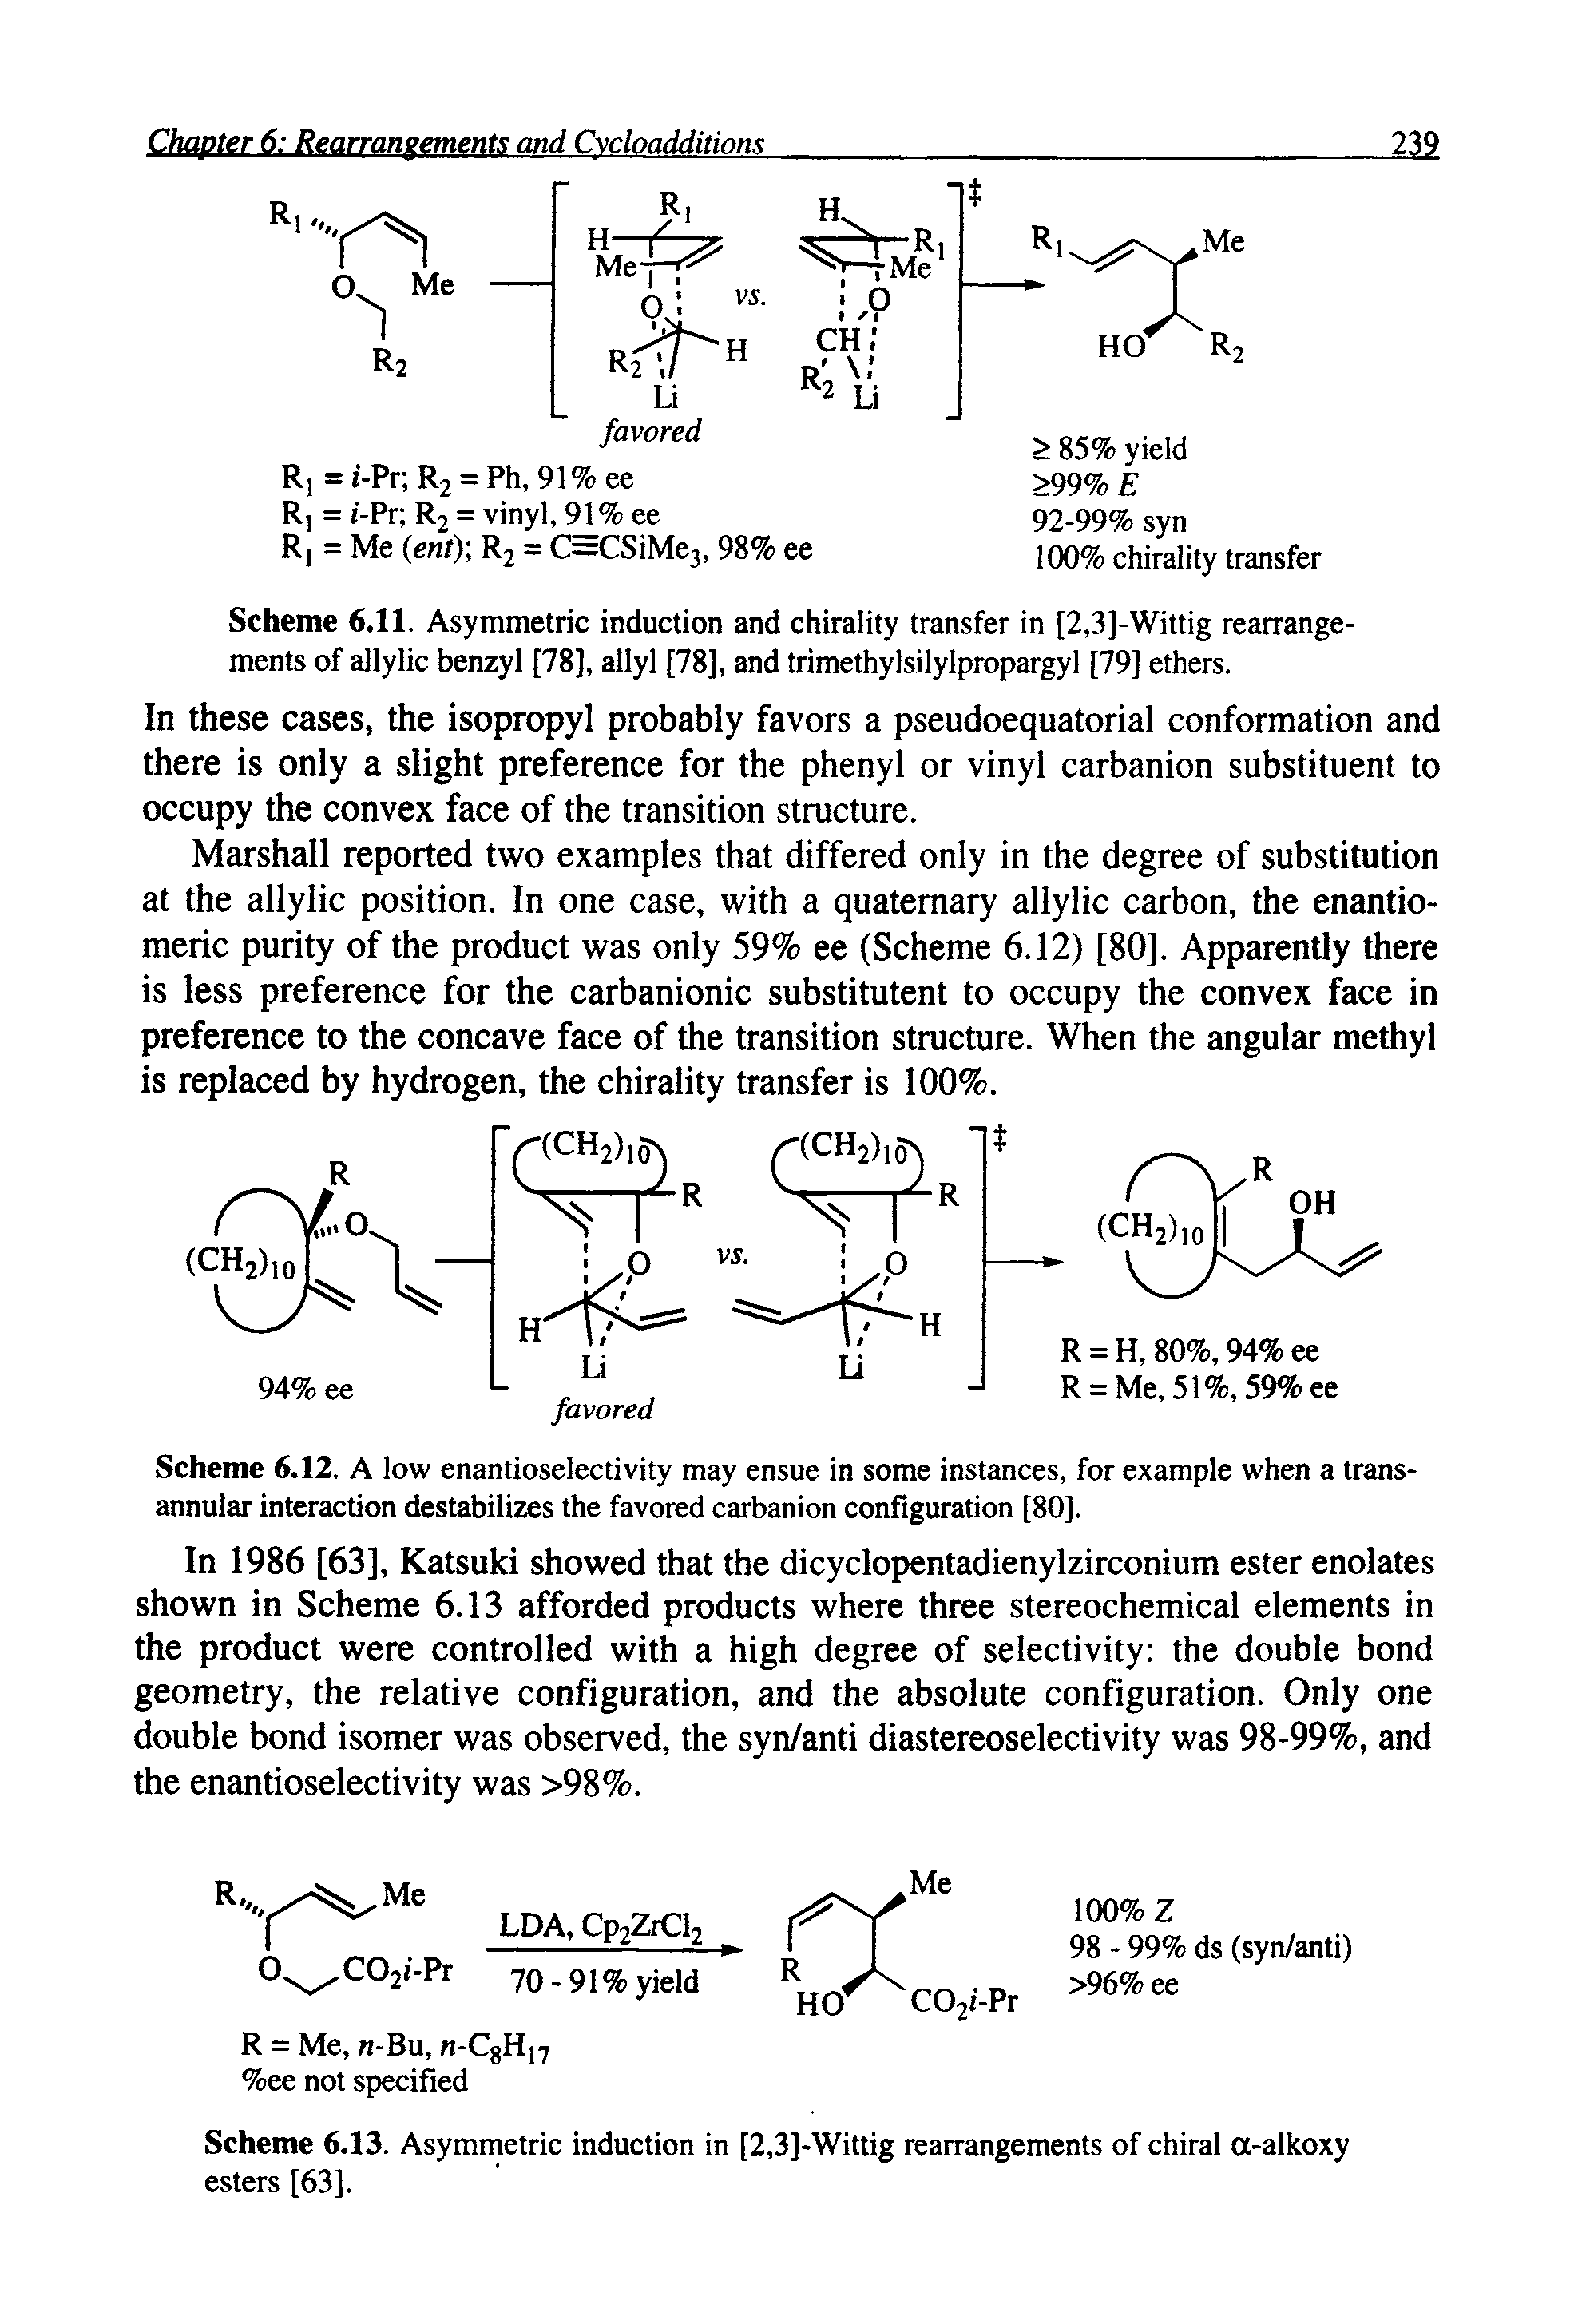 Scheme 6.12. A low enantioselectivity may ensue in some instances, for example when a trans-annular interaction destabilizes the favored carbanion configuration [80].